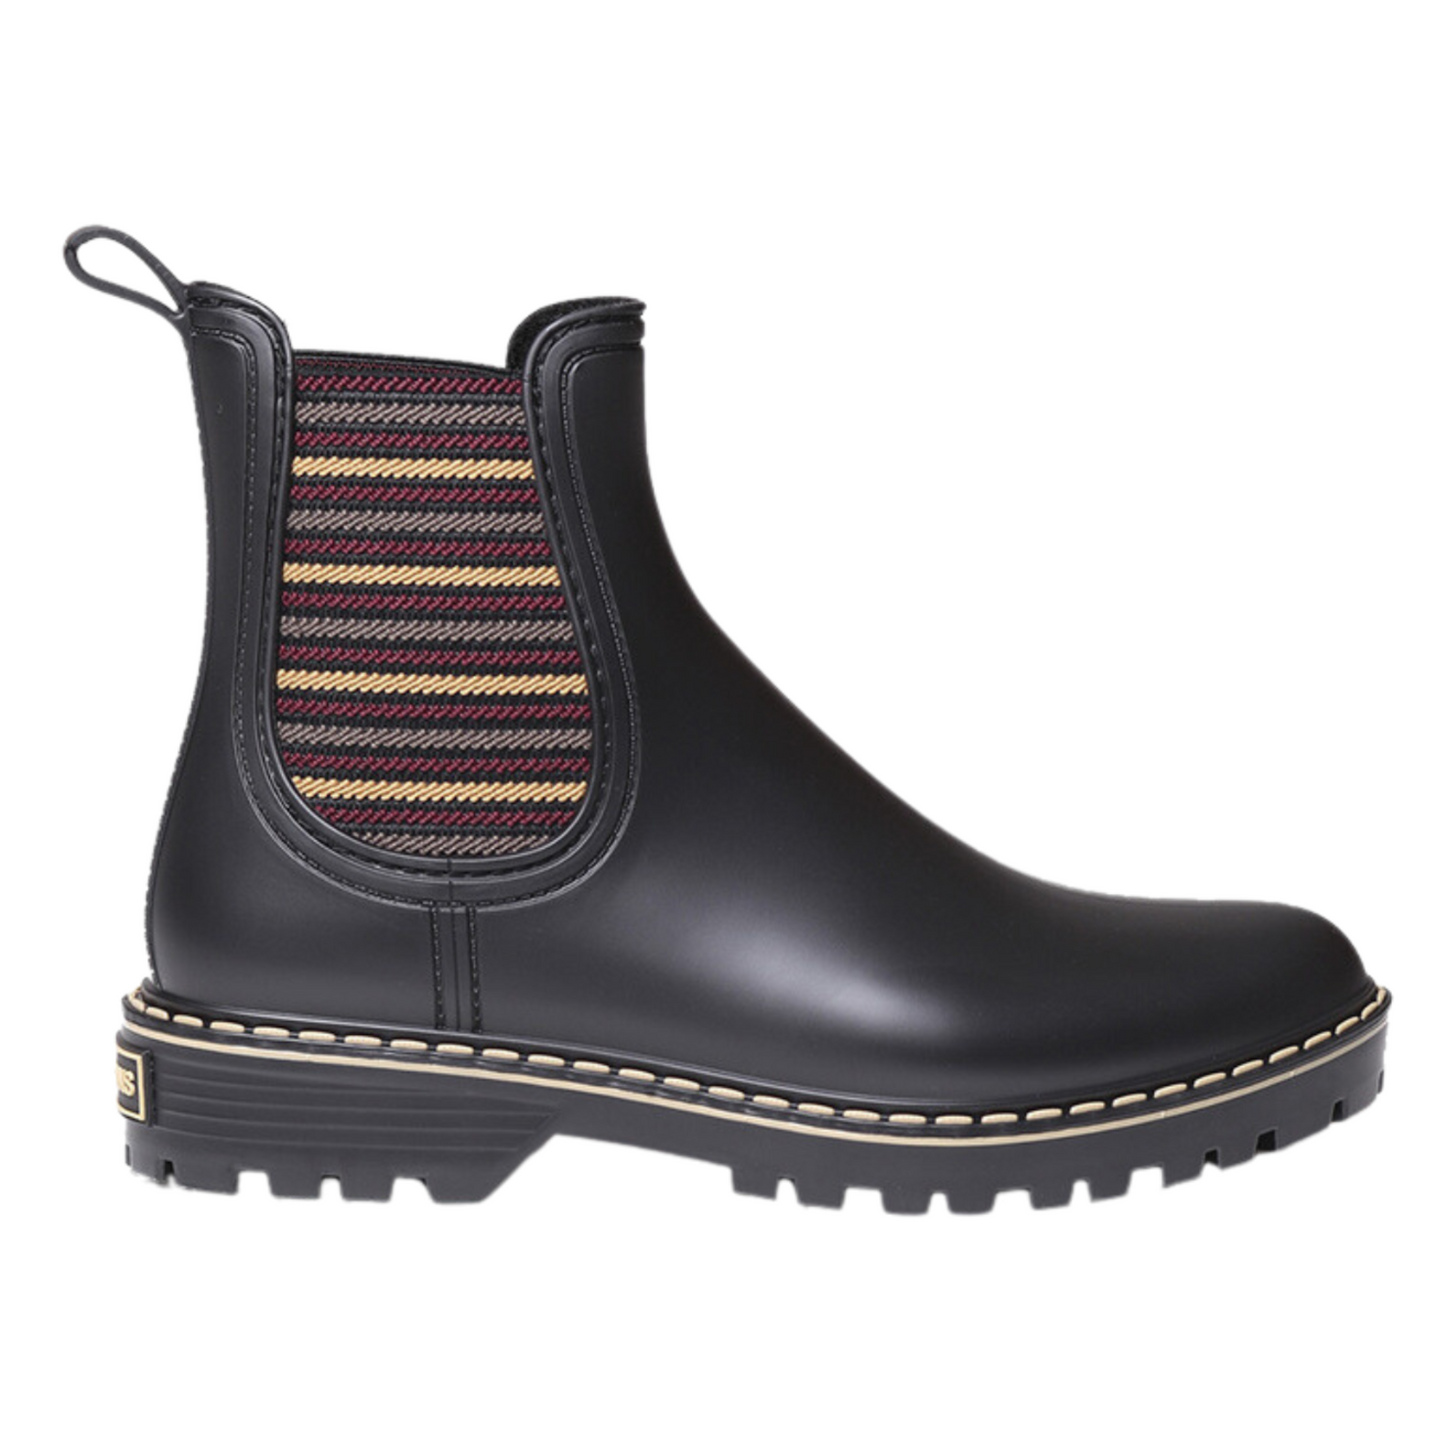 Right facing view of short black rain boot with elastic side gores and black rubber outsole